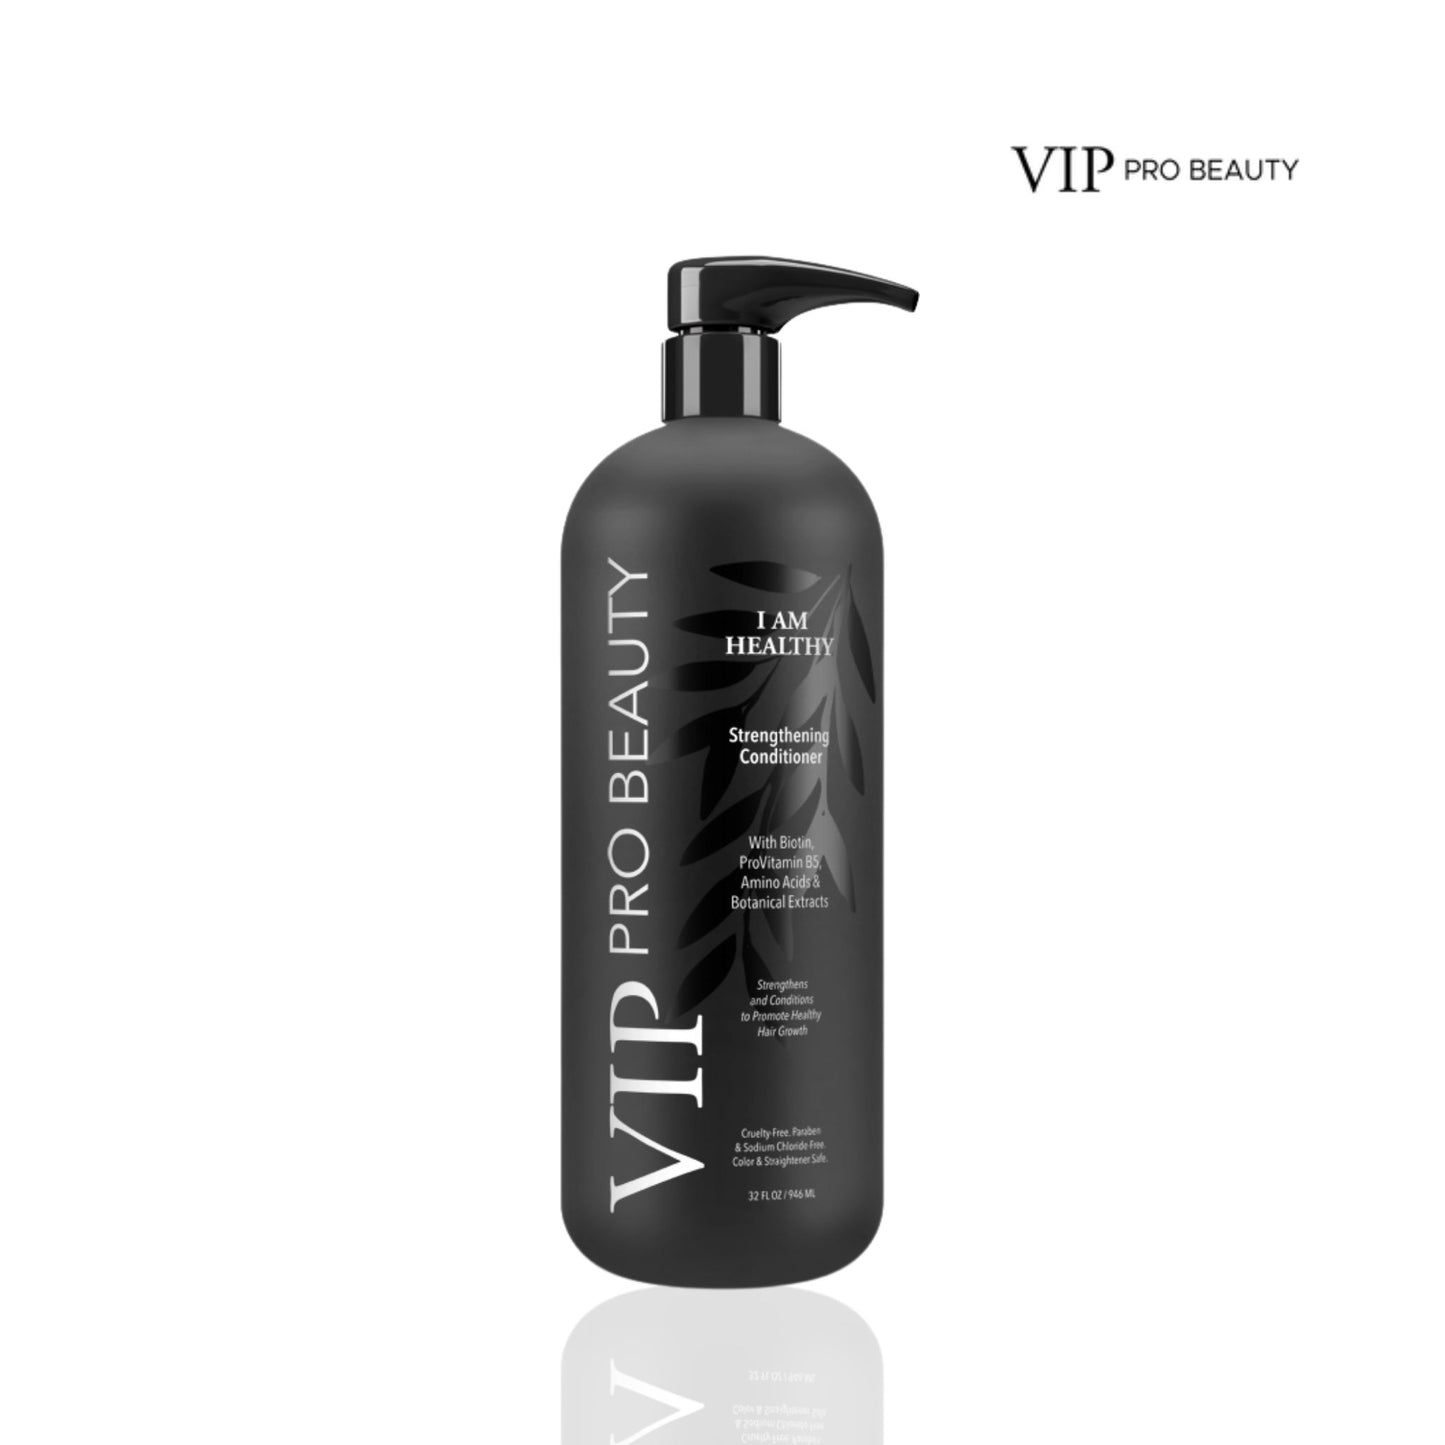 I AM HEALTHY Strengthening Conditioner. Grow your hair healthy and fast!